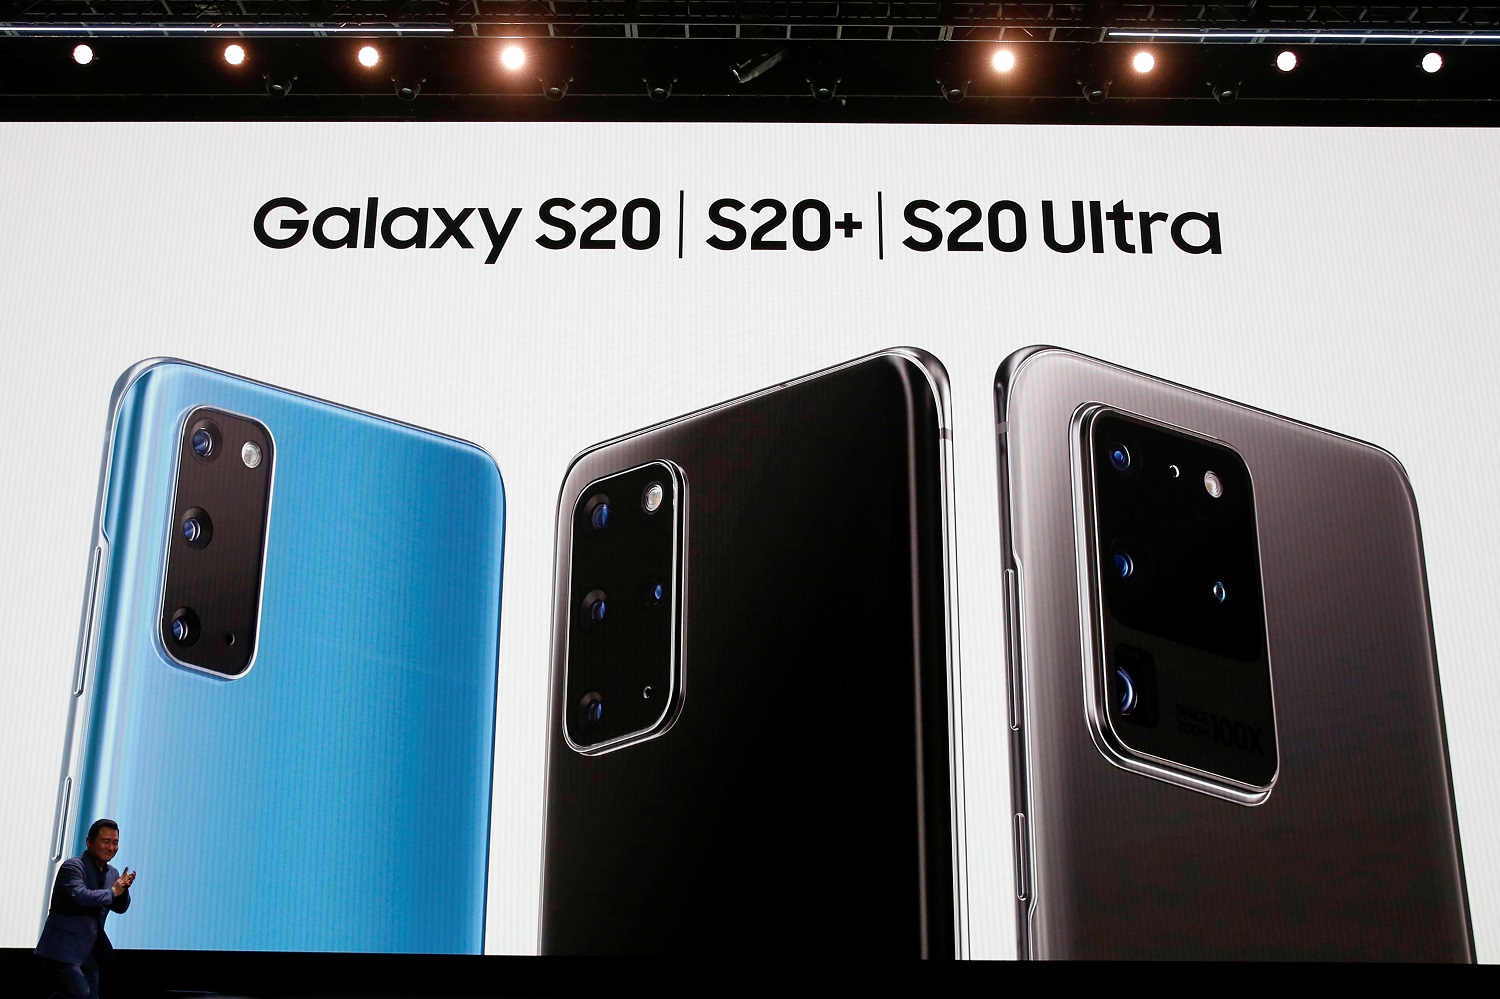 TM Roh of Samsung Electronics unveils the Galaxy S20, S20+ and S20 Ultra smartphones during Samsung Galaxy Unpacked 2020 in San Francisco